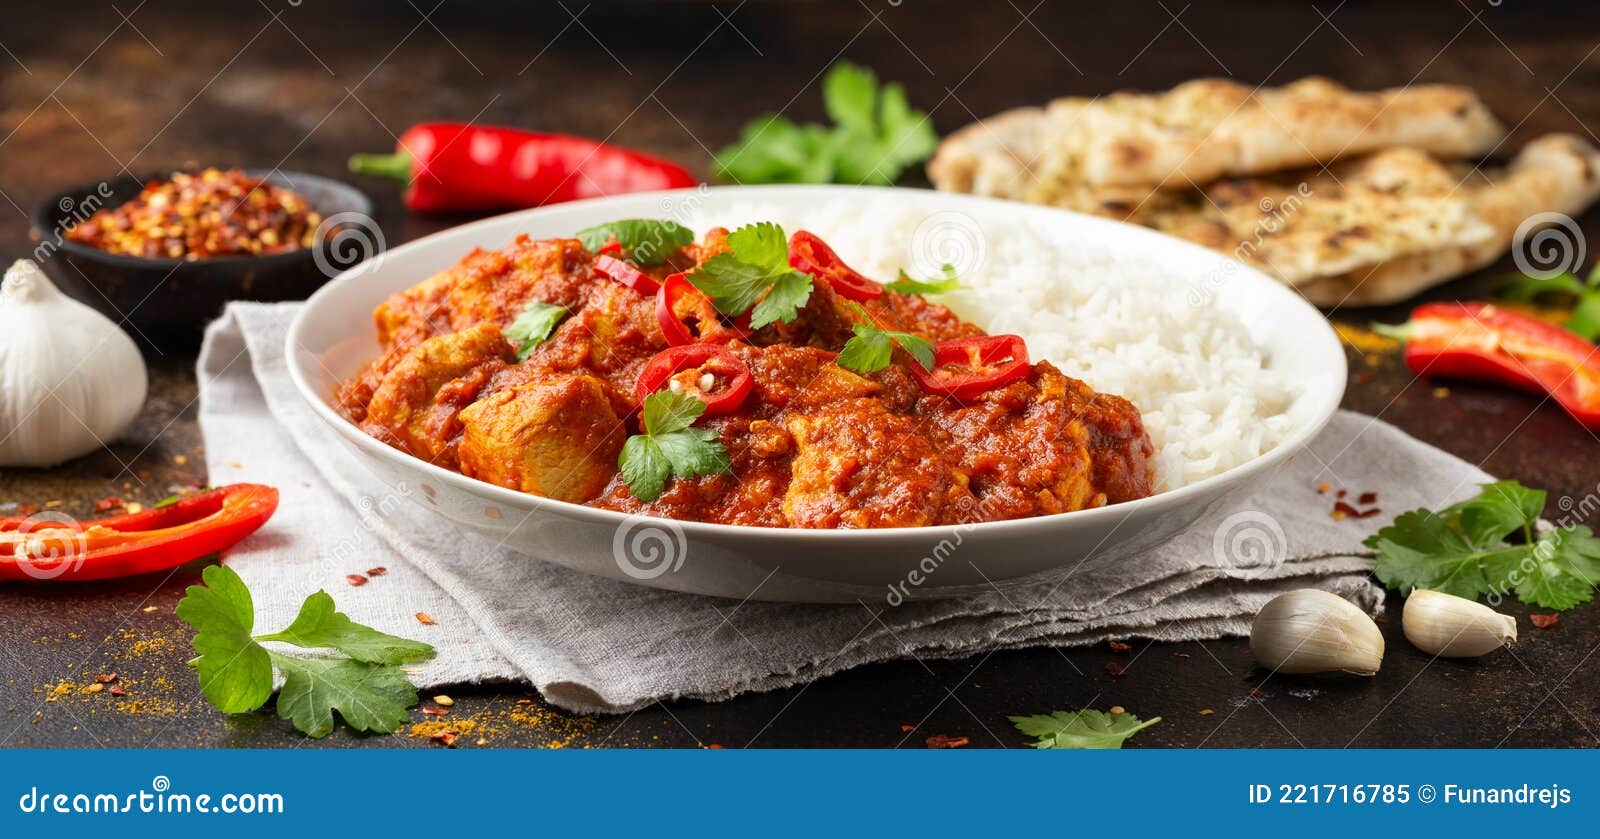 spicy chicken pathia curry with basmati rice in a white plate. healthy food.